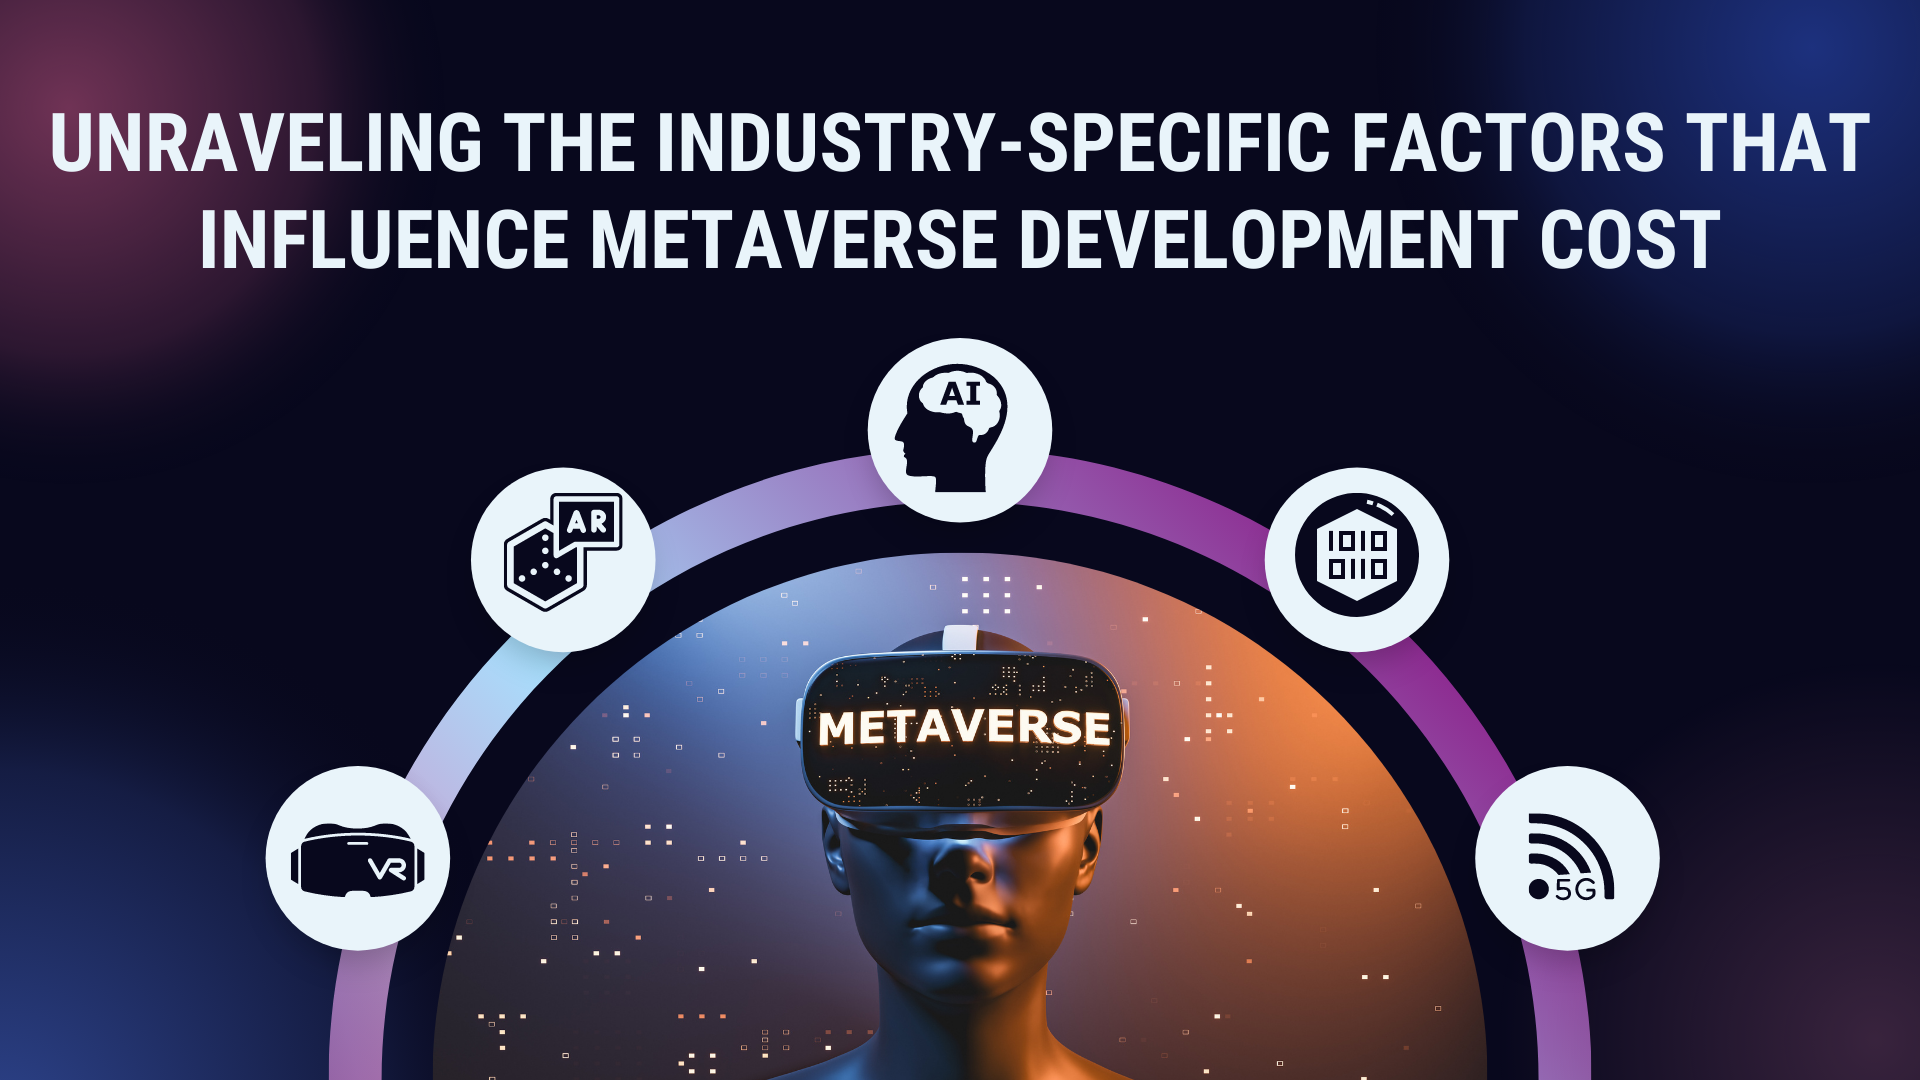 Unraveling the Industry-Specific Factors That Influence Metaverse Development Cost